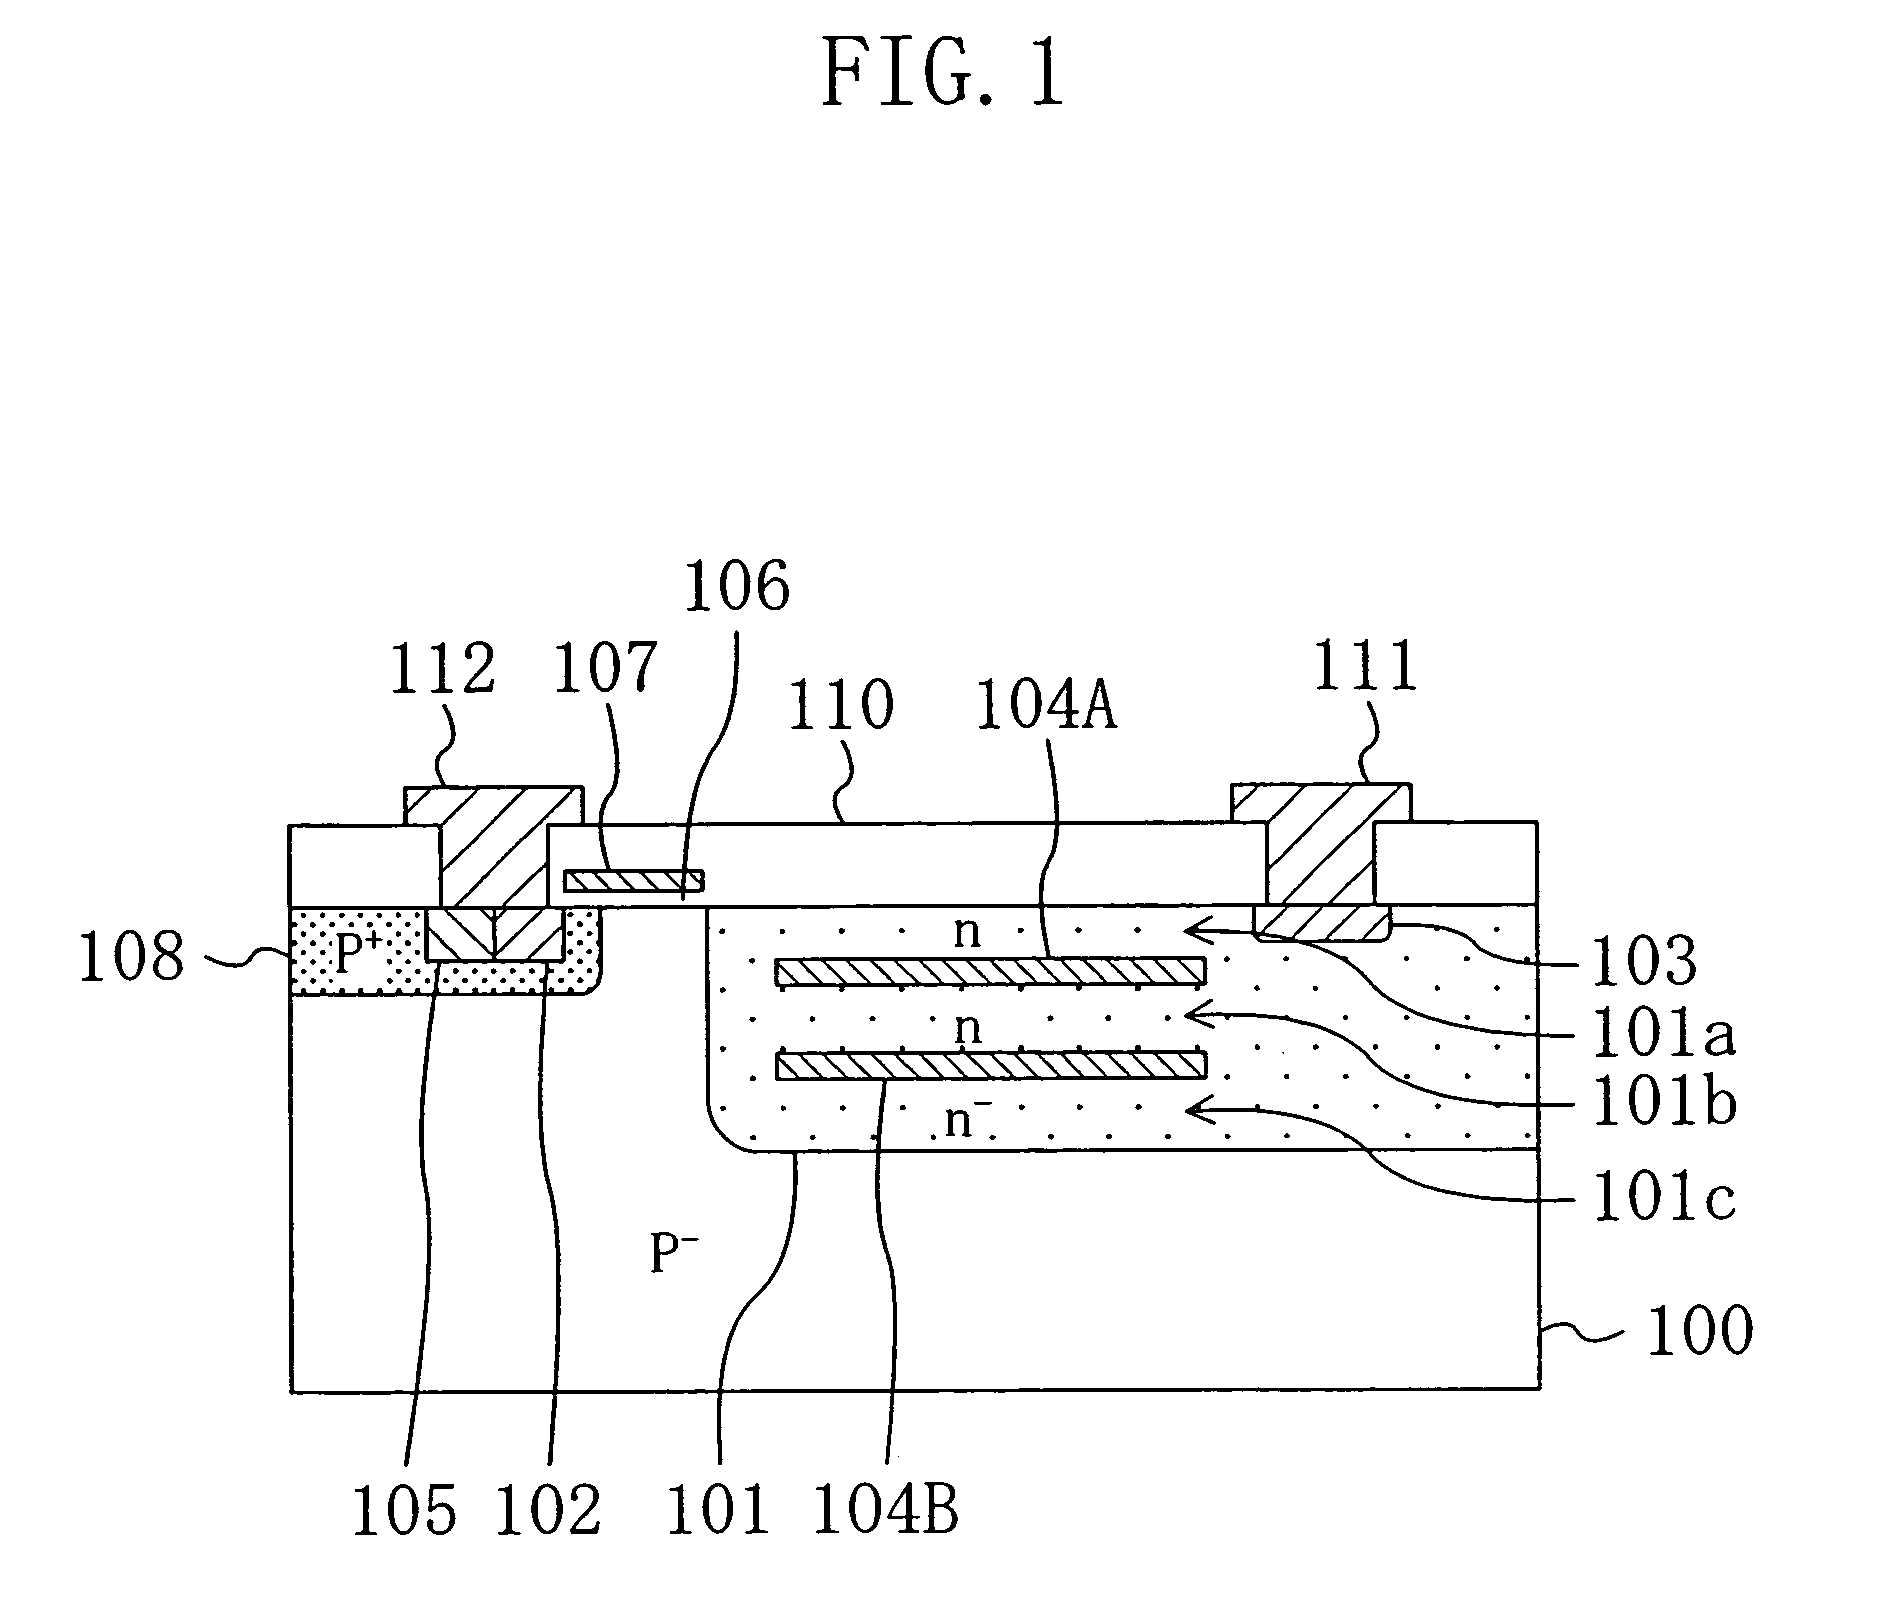 Method of manufacturing a semiconductor device having a high breakdown voltage and low on-resistance